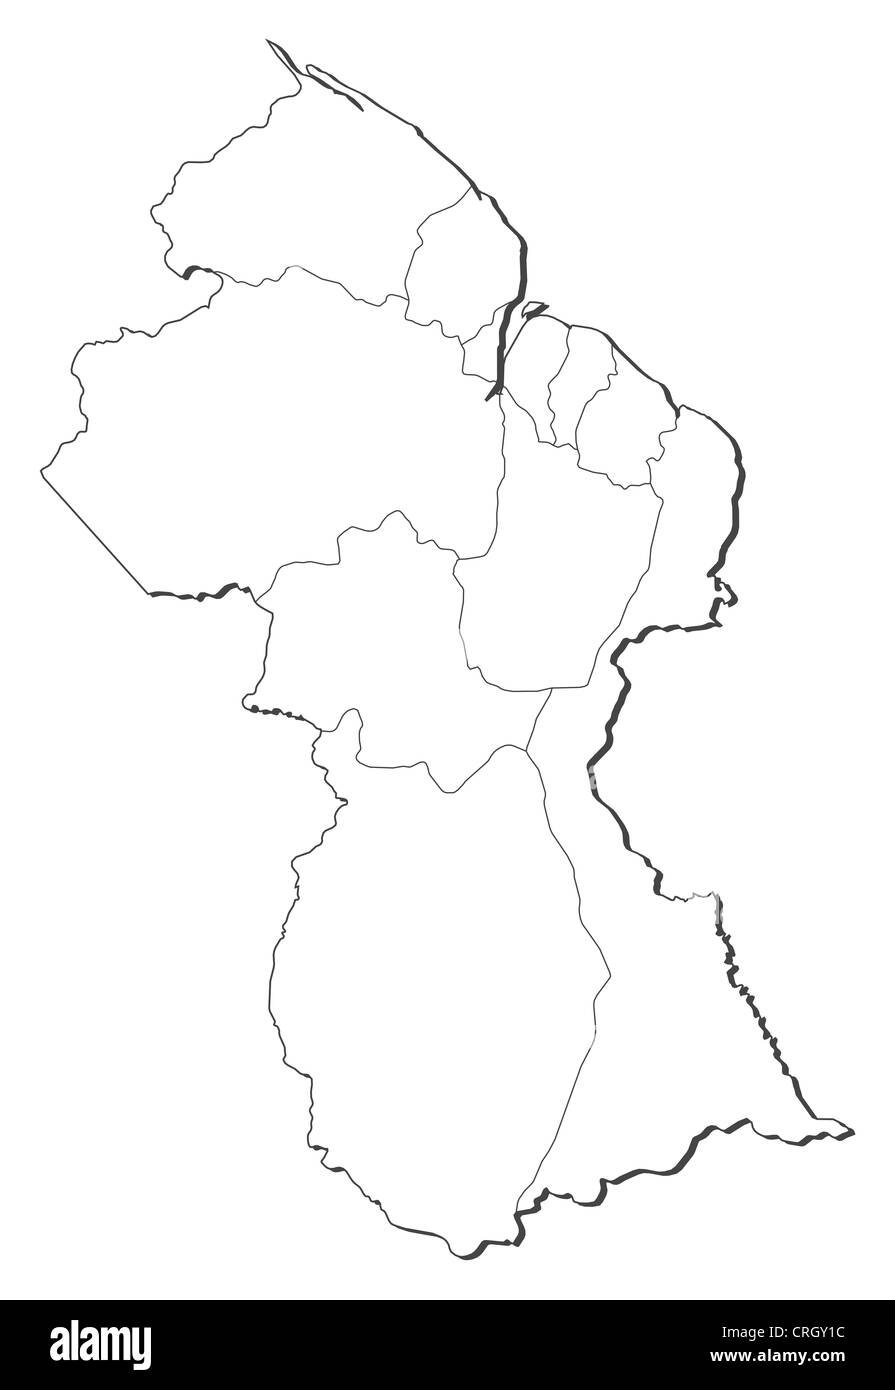 Political map of Guyana with the several regions. Stock Photo